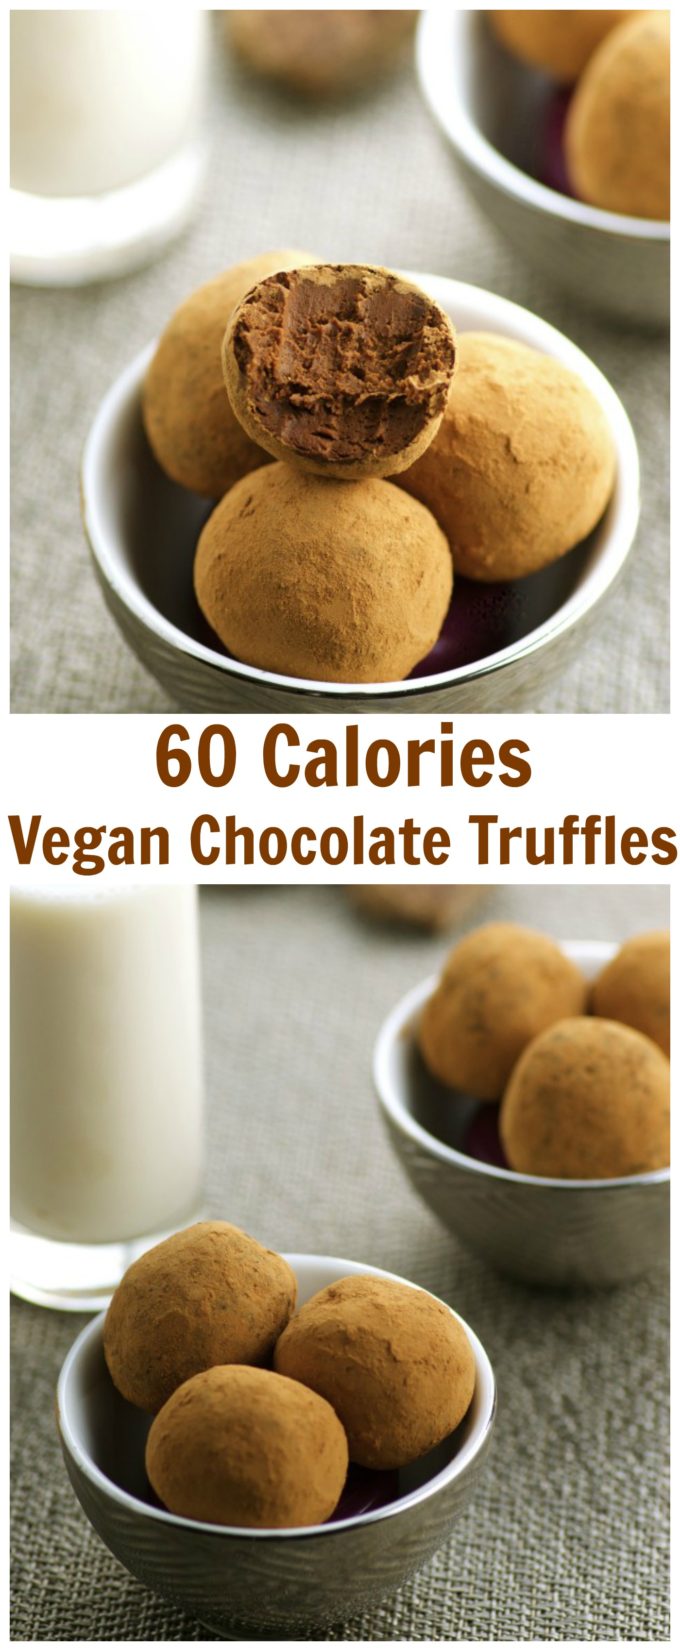 Only 60 calories per chocolate truffle. Guilt free